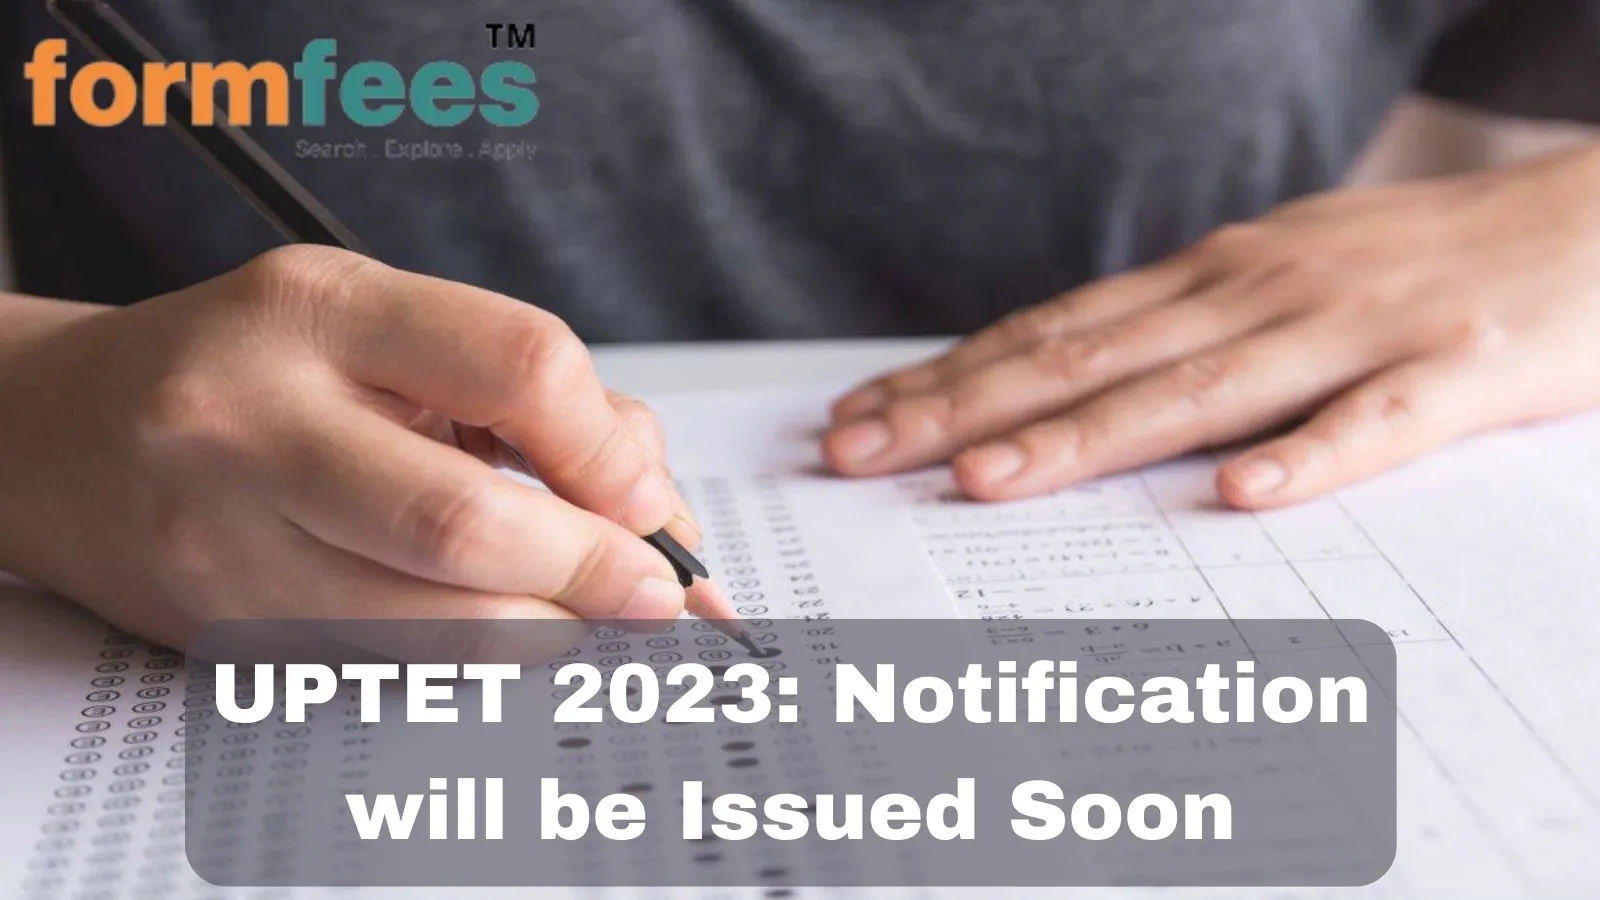 UPTET 2023: Notification will be Issued Soon